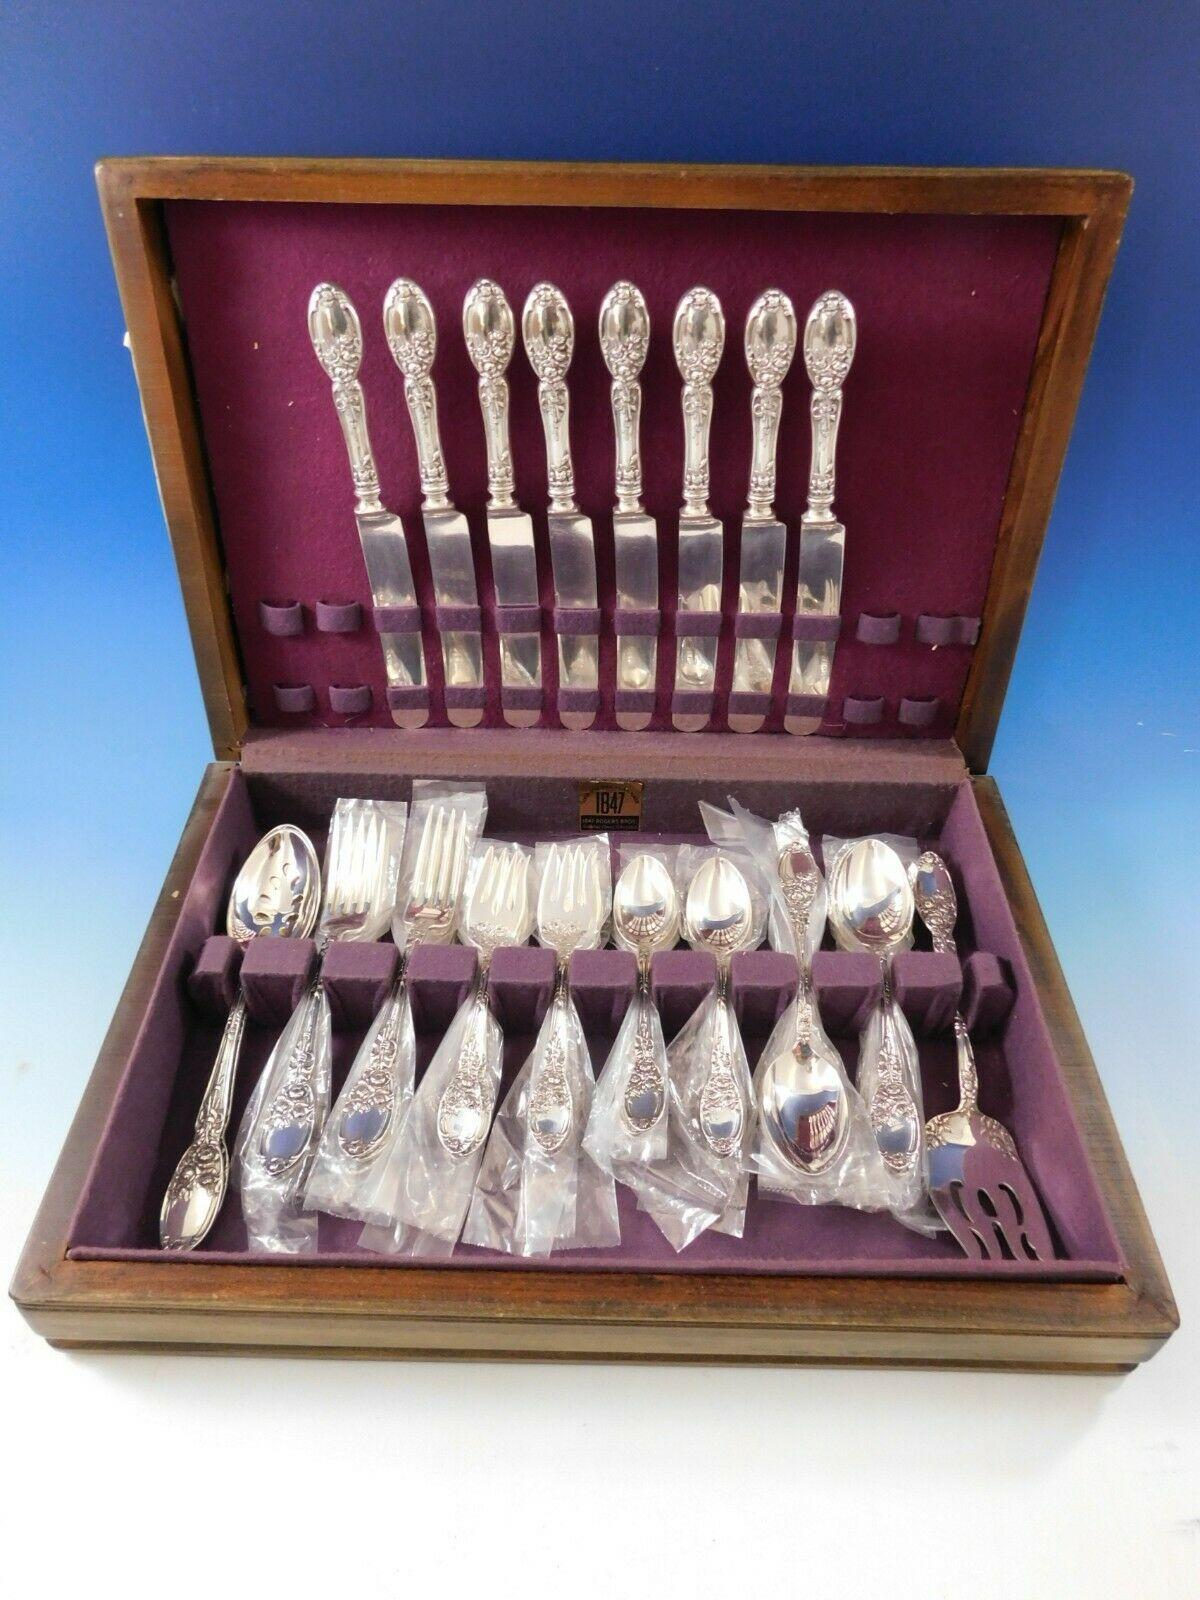 Charming vintage heirloom quality Brides Bouquet by Alvin silverplate flatware set - 43 Pieces. This set includes:

8 knives, 8 7/8